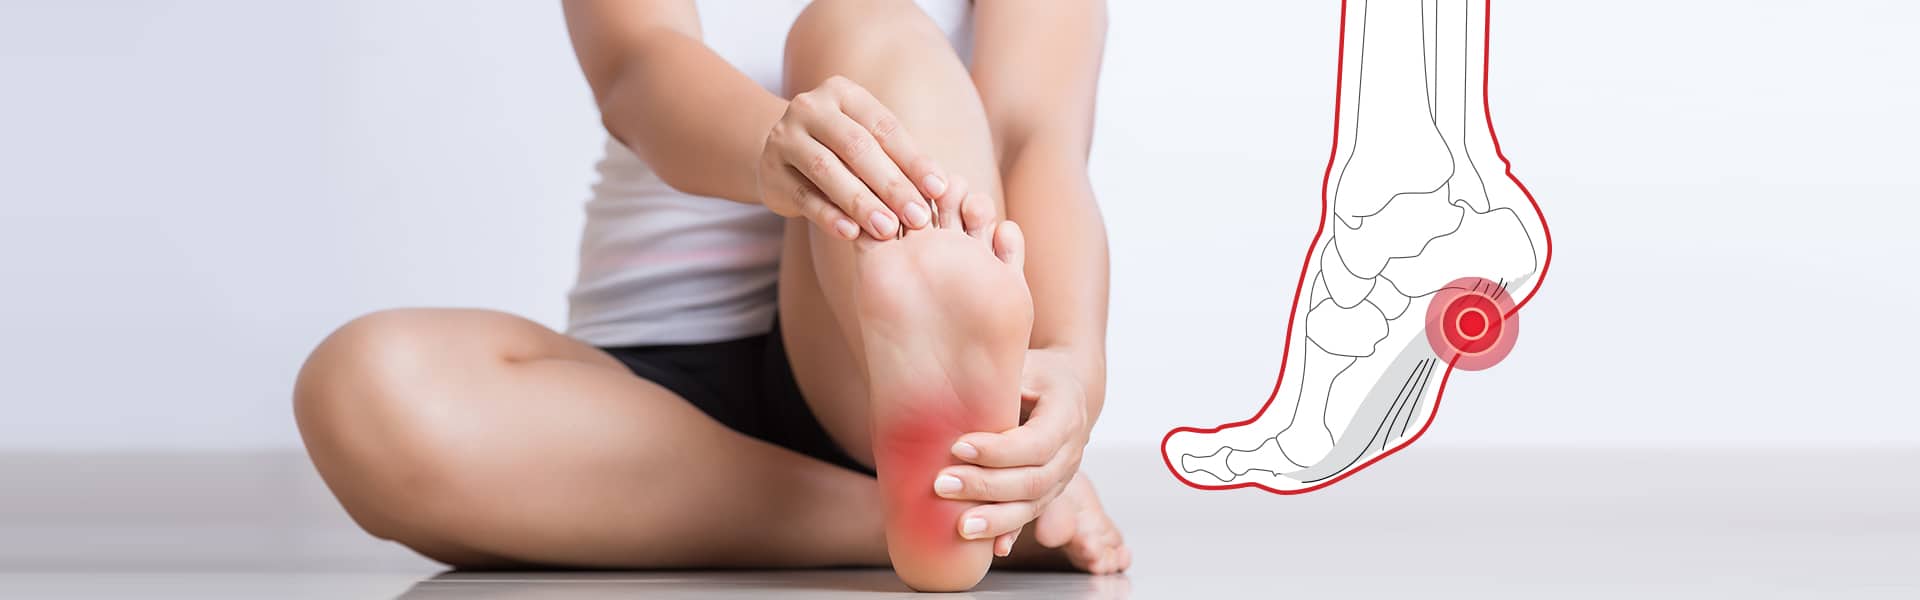 6 Tips to Reduce Your Heel Pain When Walking for Exercise | Creekside  Physical Therapy & Rehabilitation